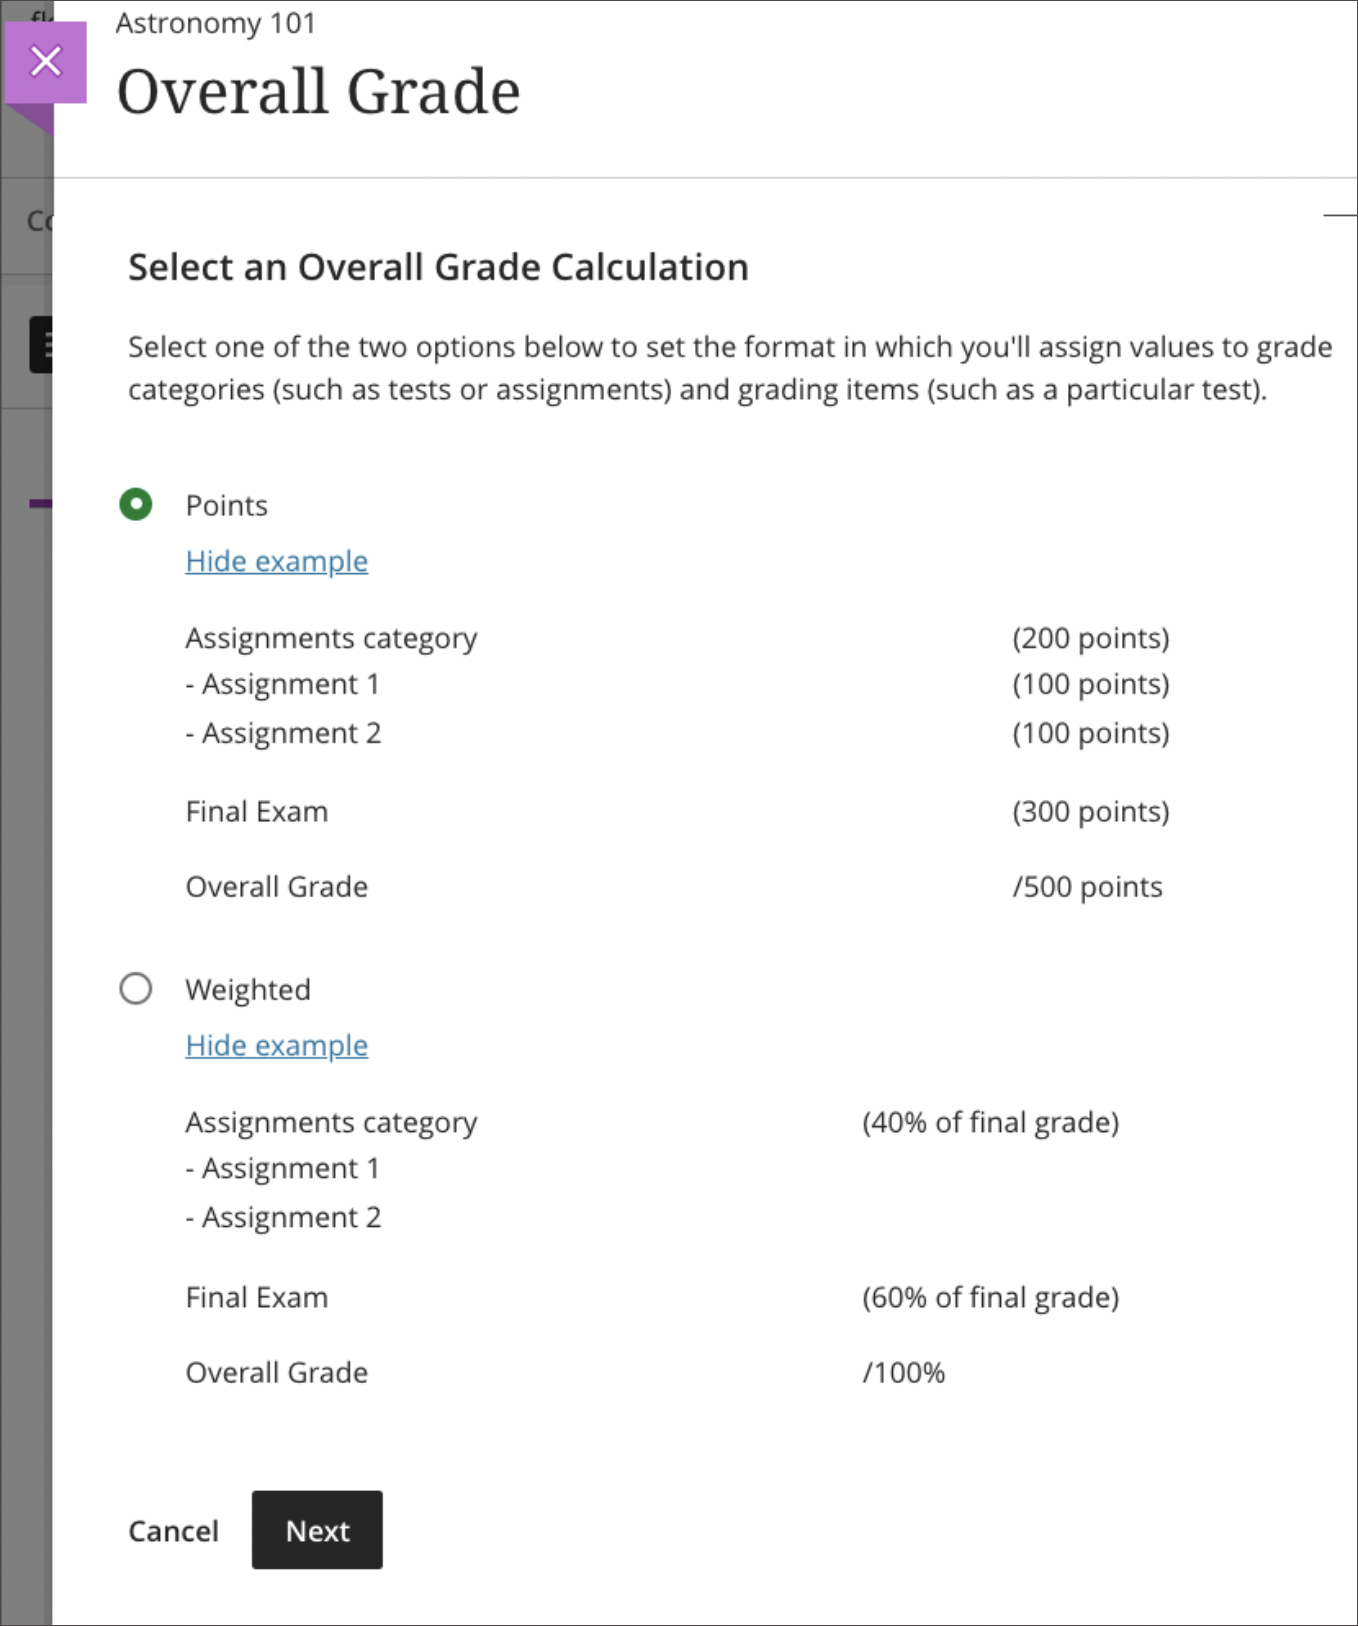 Overall Grade calculation wizard with examples